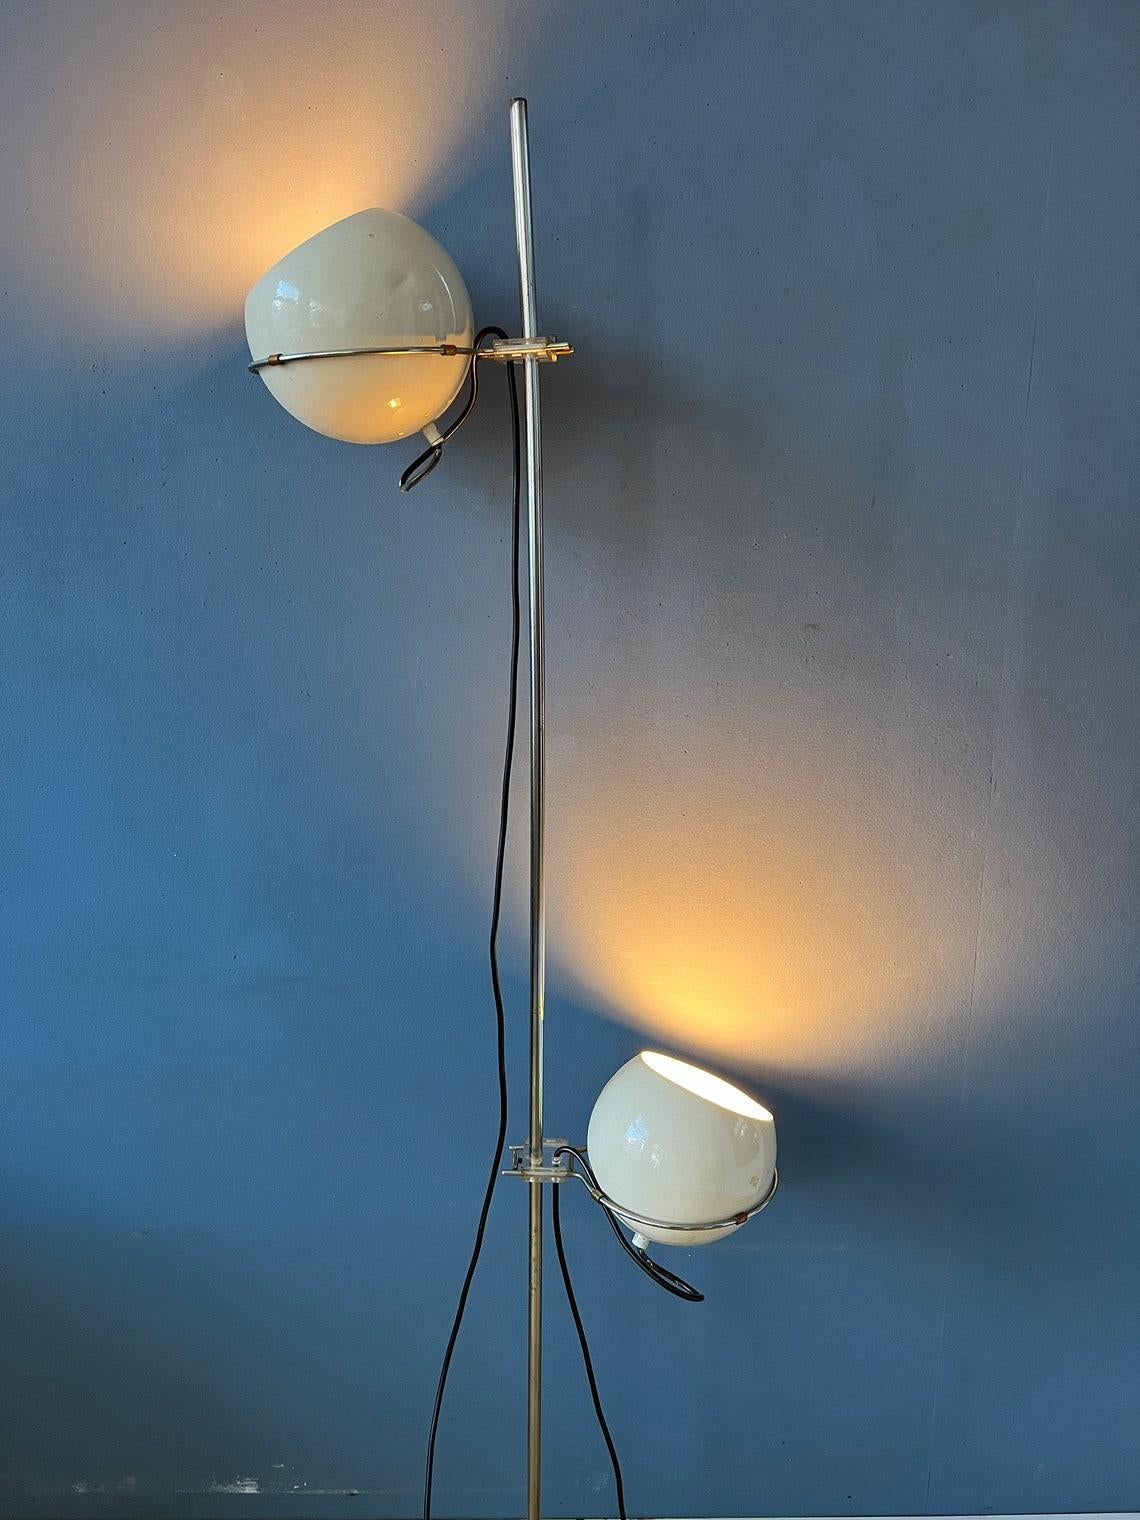 Mid century beige eyeball floor lamp by GEPO. Its distinctive feature is the adjustable eyeball-like shades that can be directed to different angles, allowing you to customize the direction and focus of the light. The shades can also move up and